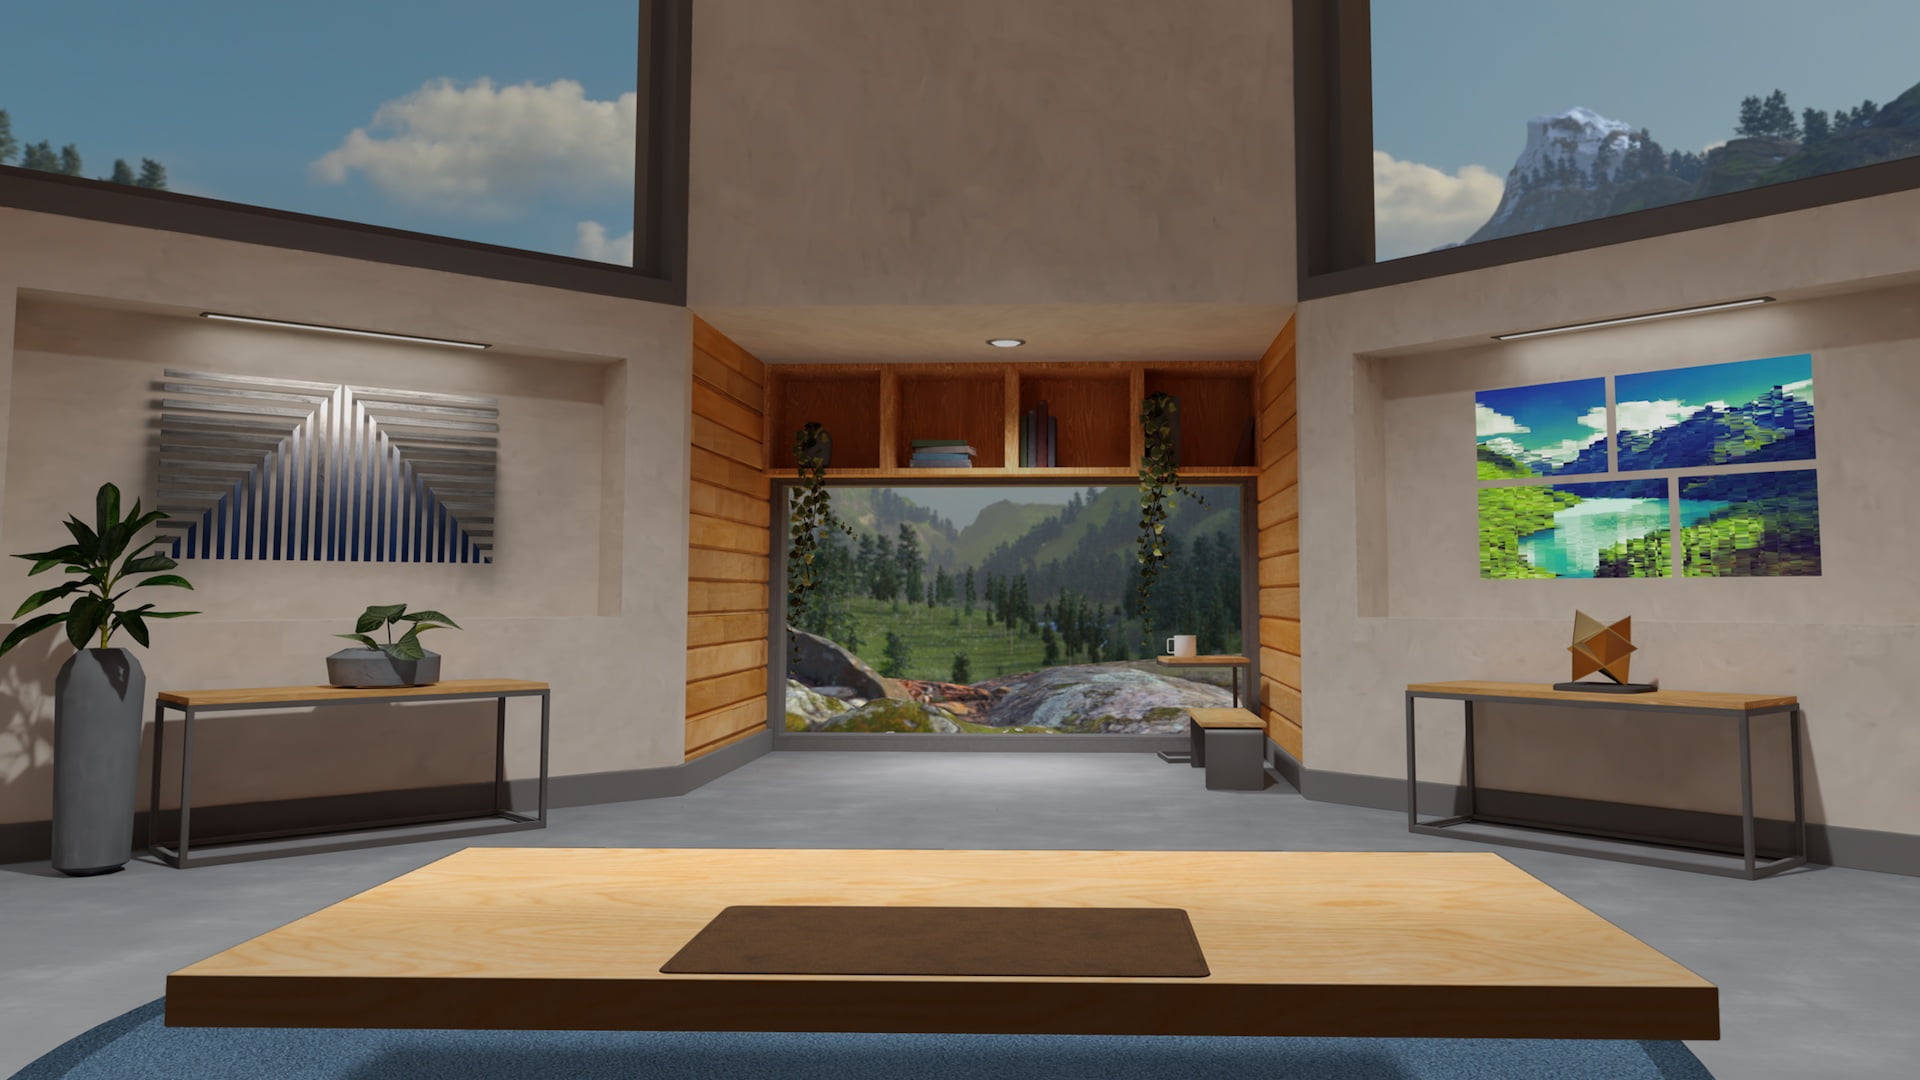 A spacious study in the mountains with a view of the surrounding nature.